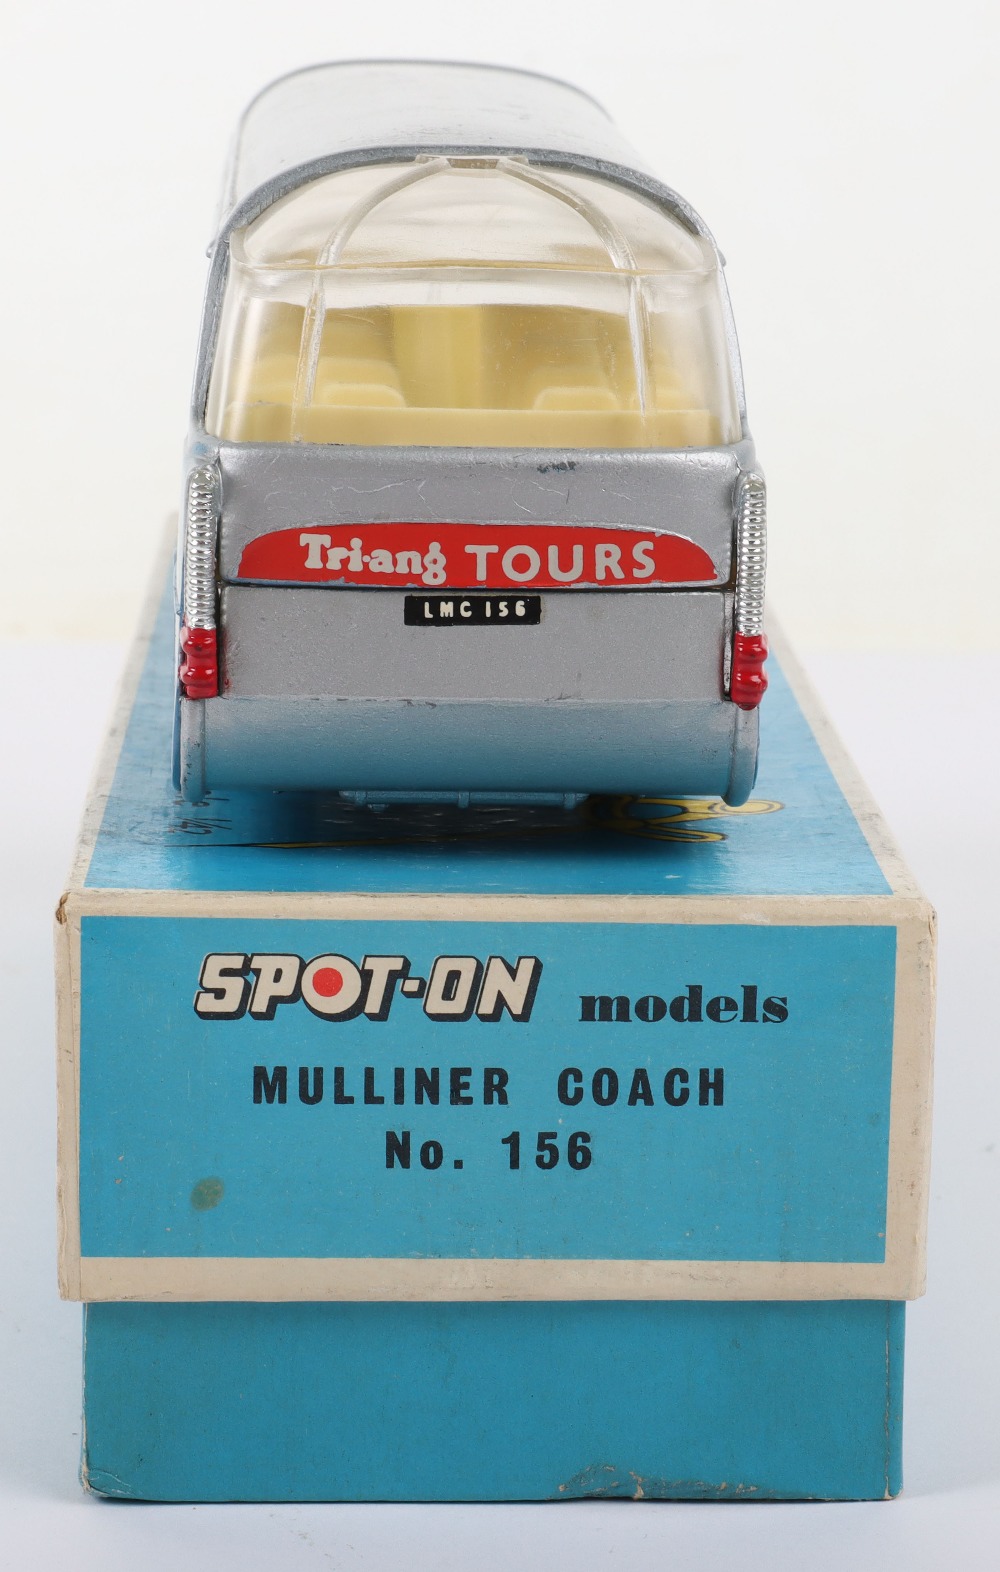 Boxed Tri-ang Spot On Models 156 Mulliner Luxury Coach - Image 5 of 6